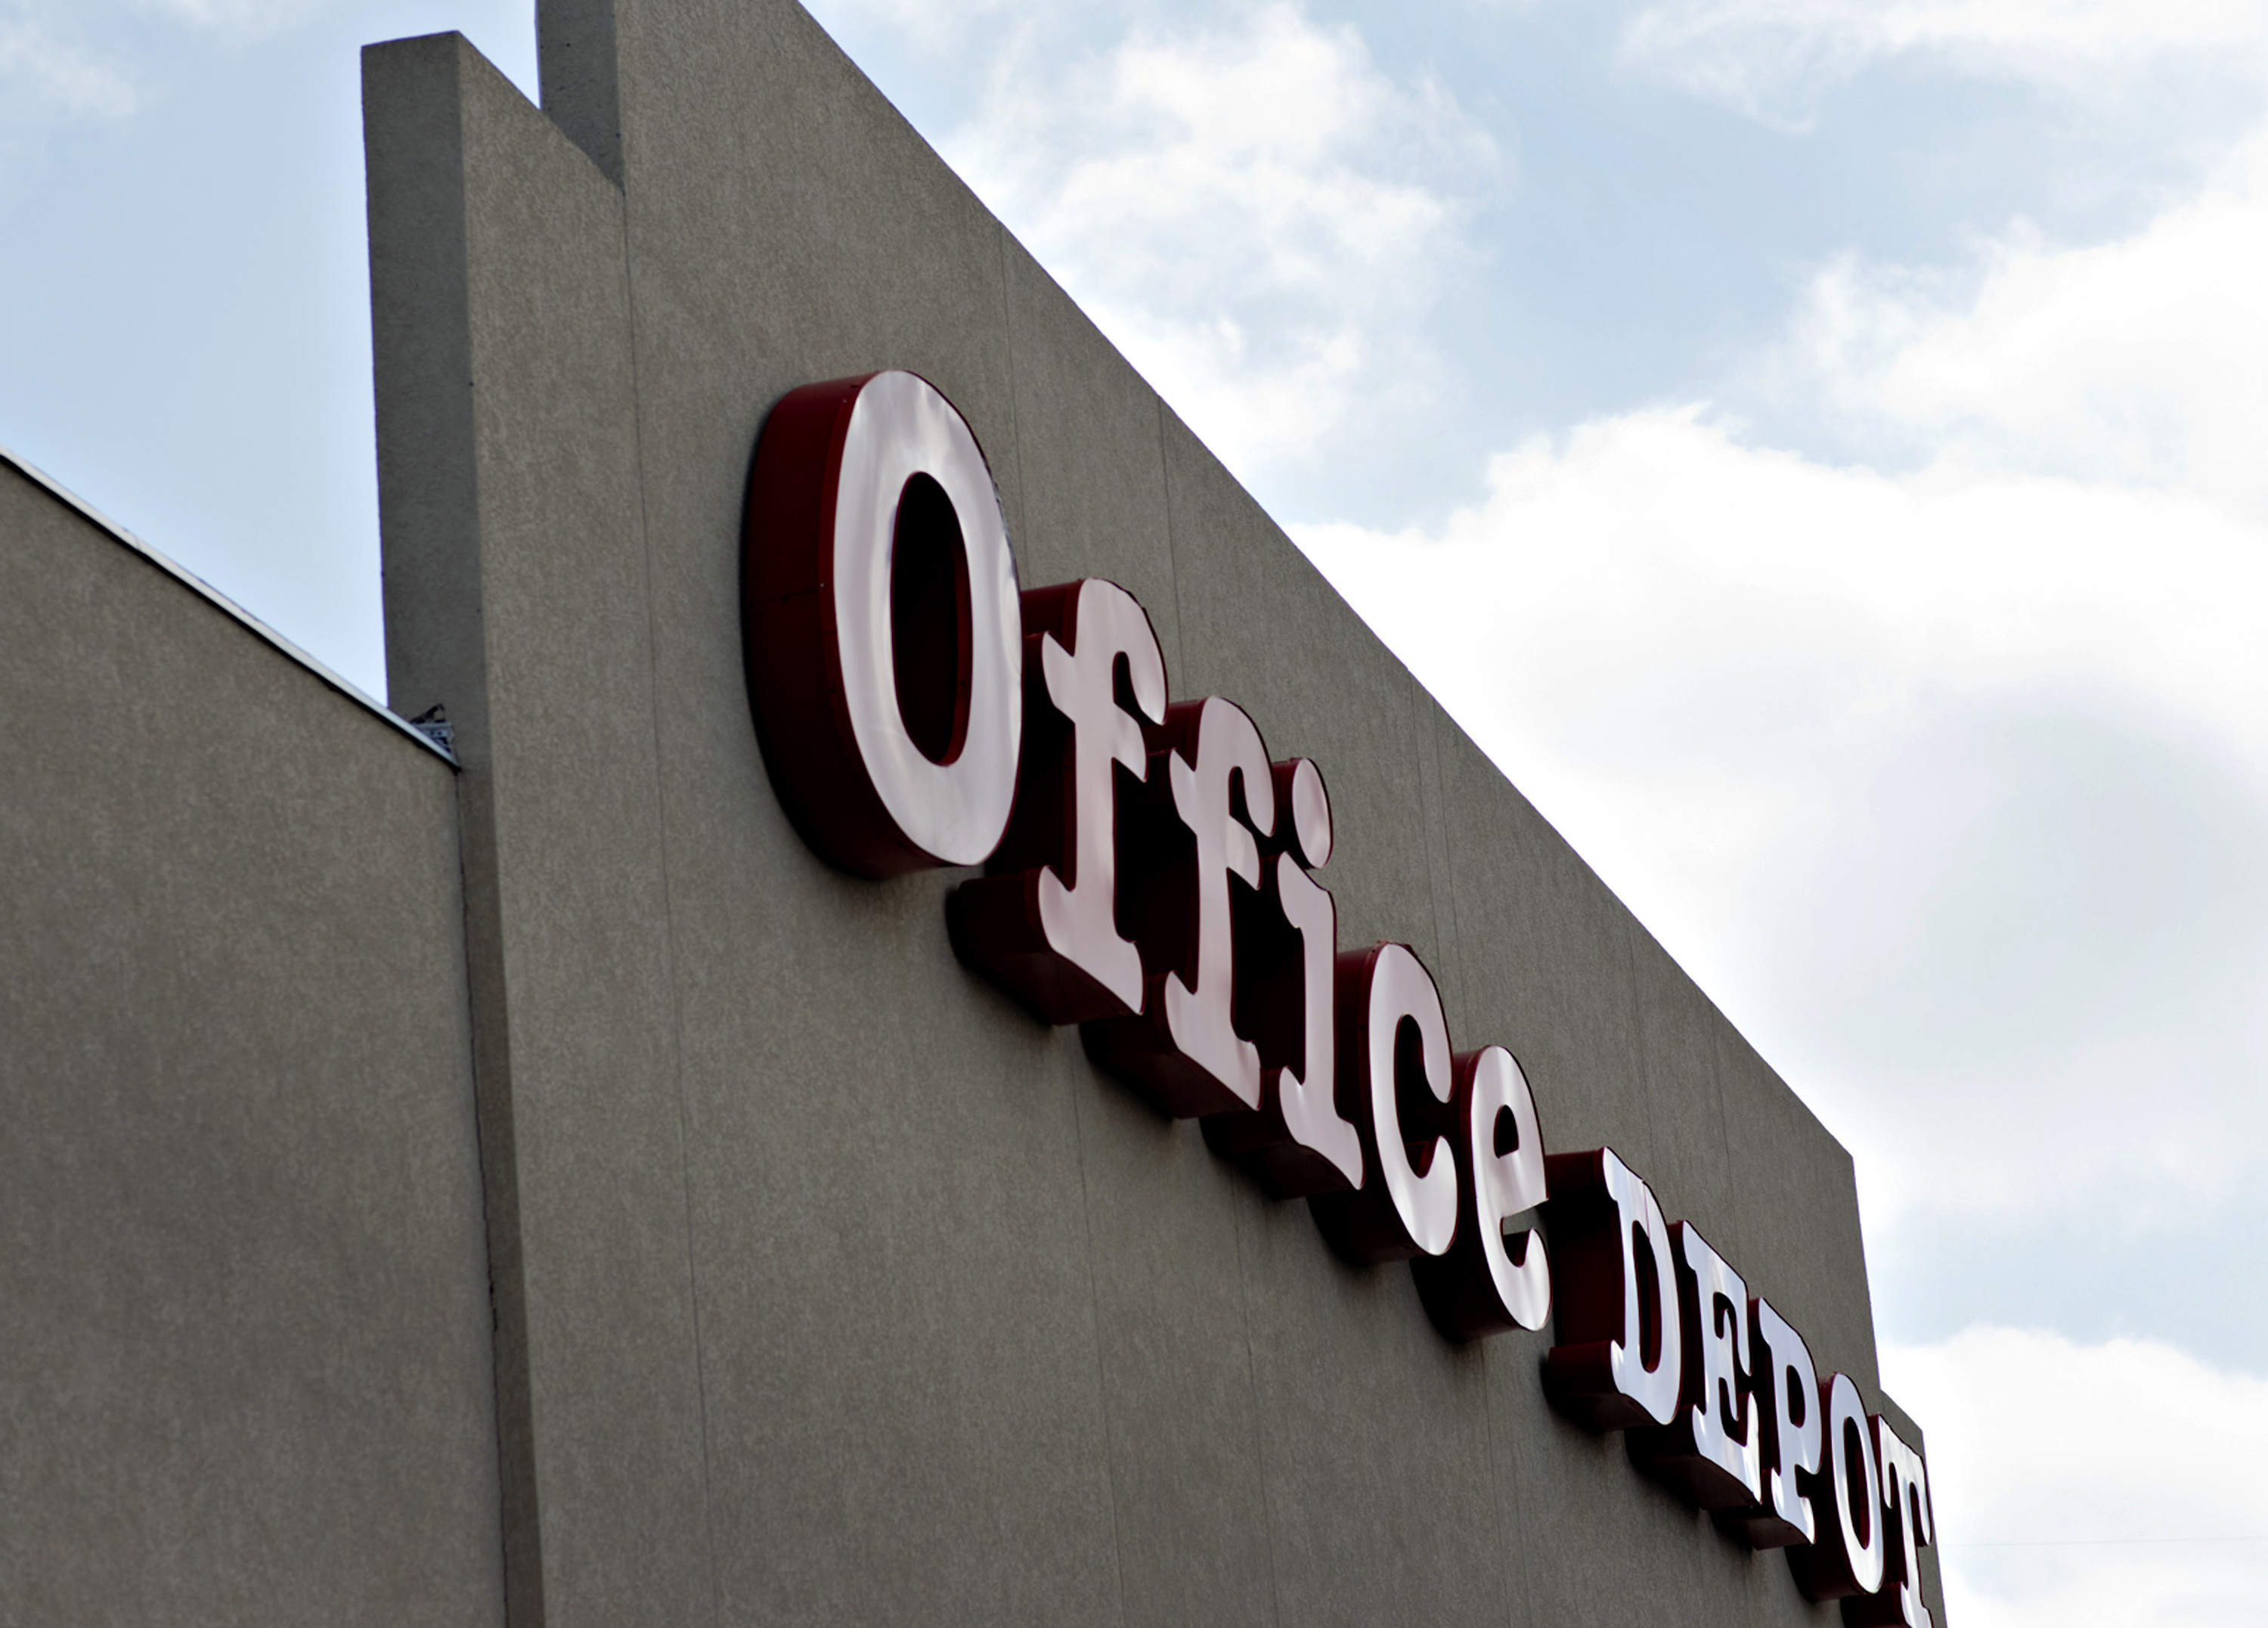 An Office Depot store stands in Peoria, Illinois, U.S., on Tuesday, Feb. 19, 2013. (Daniel Acker—Bloomberg/Getty Images)